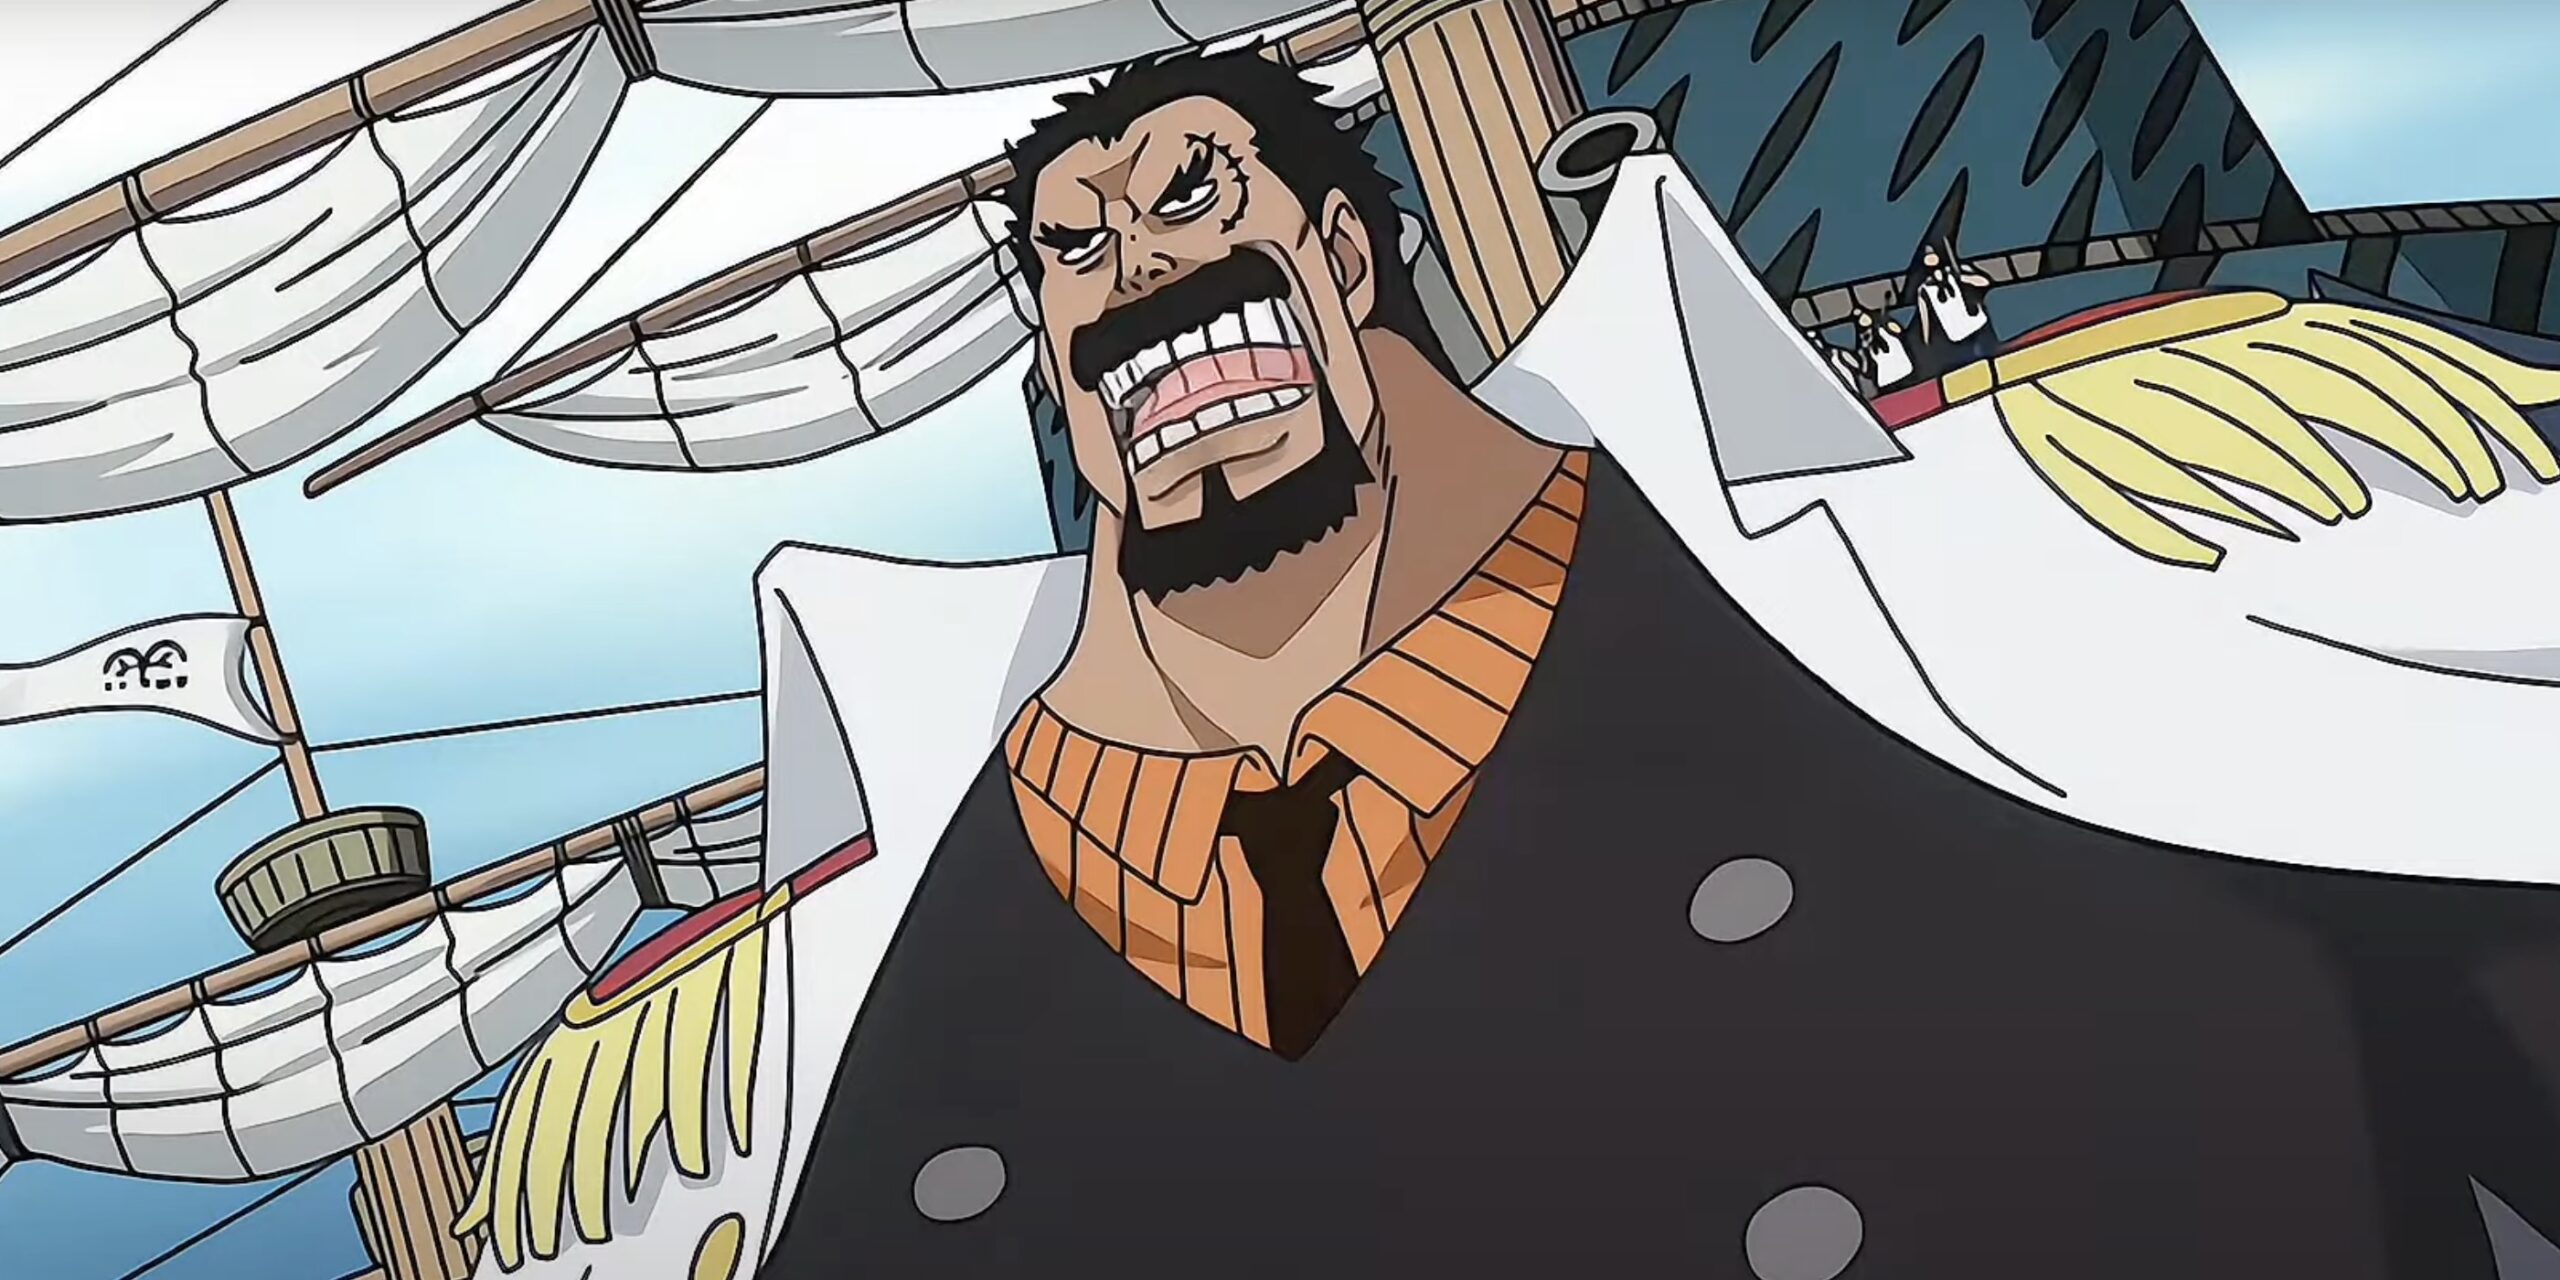 Controversy Sparks Among One Piece Fans Over Garp's Actions Towards Ace: Is Garp a Coward?